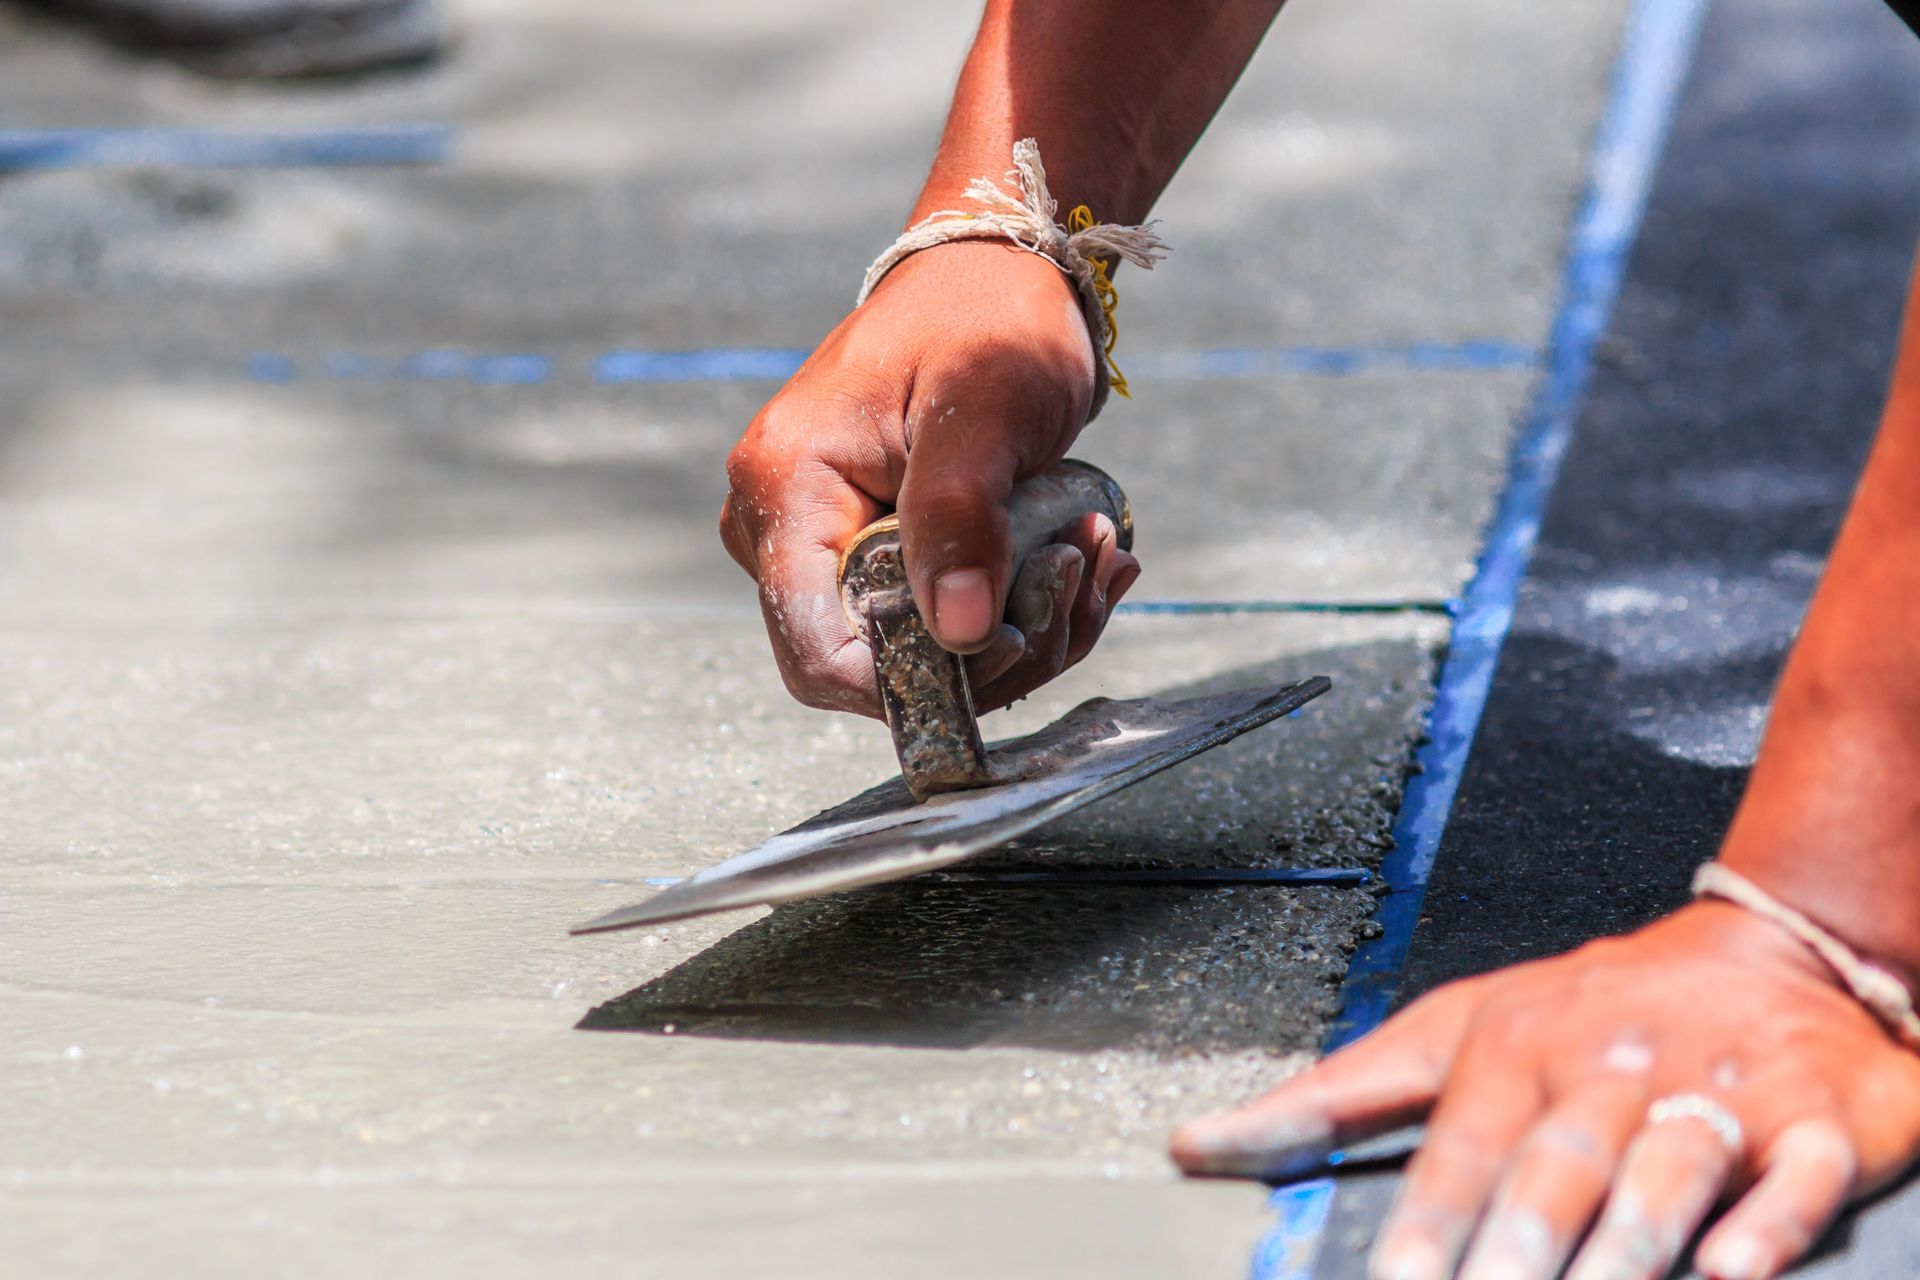 concrete contractor resurfacing a small section of concrete walkway using a trowel